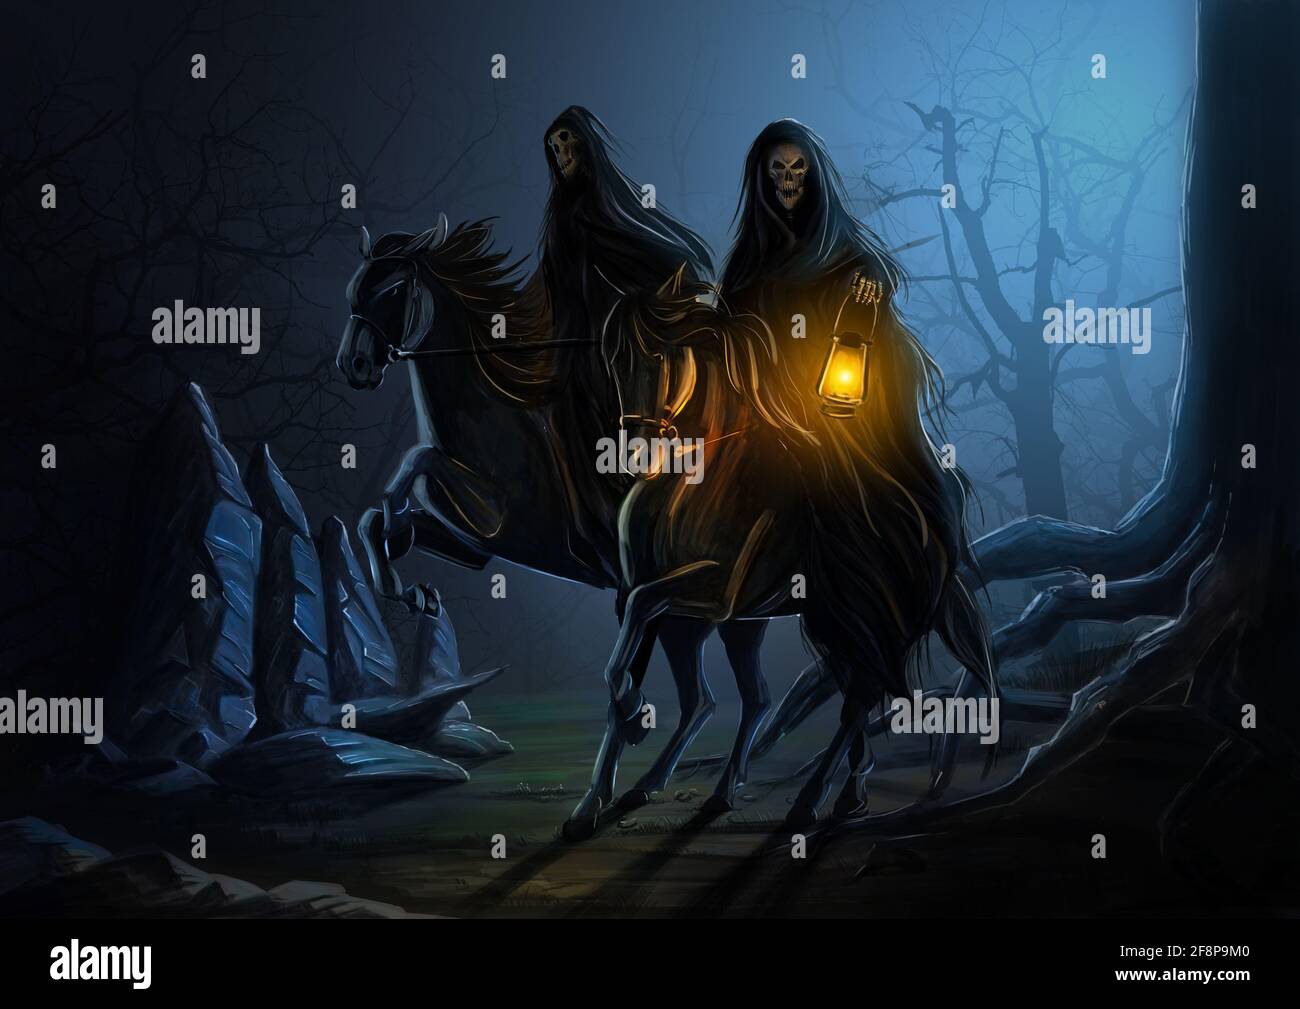 Two riders dark skeletons in the spooky forest. Evil monsters by the moonlight on the horses. Digital painting illustration. Stock Photo